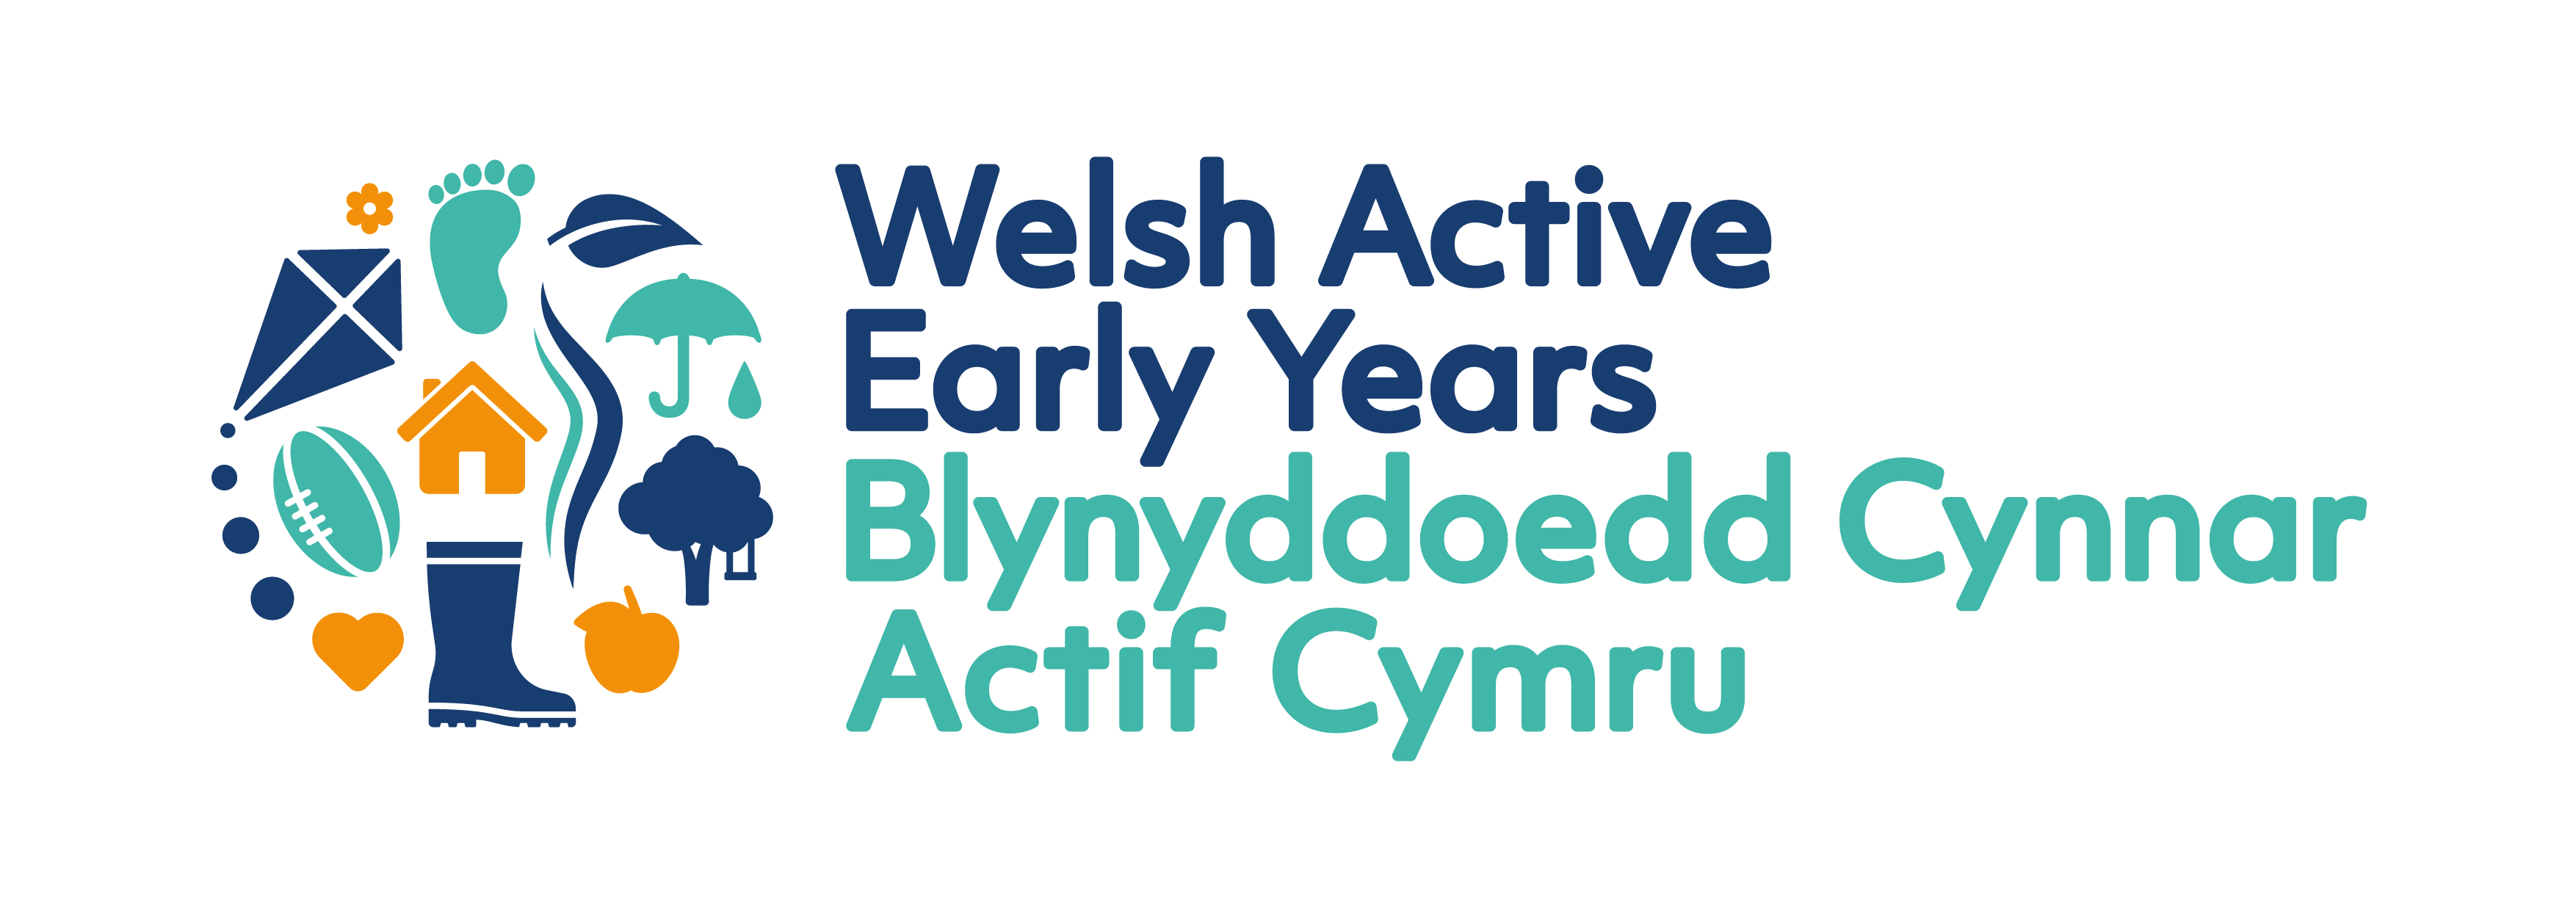 Welsh Active Early Years logo